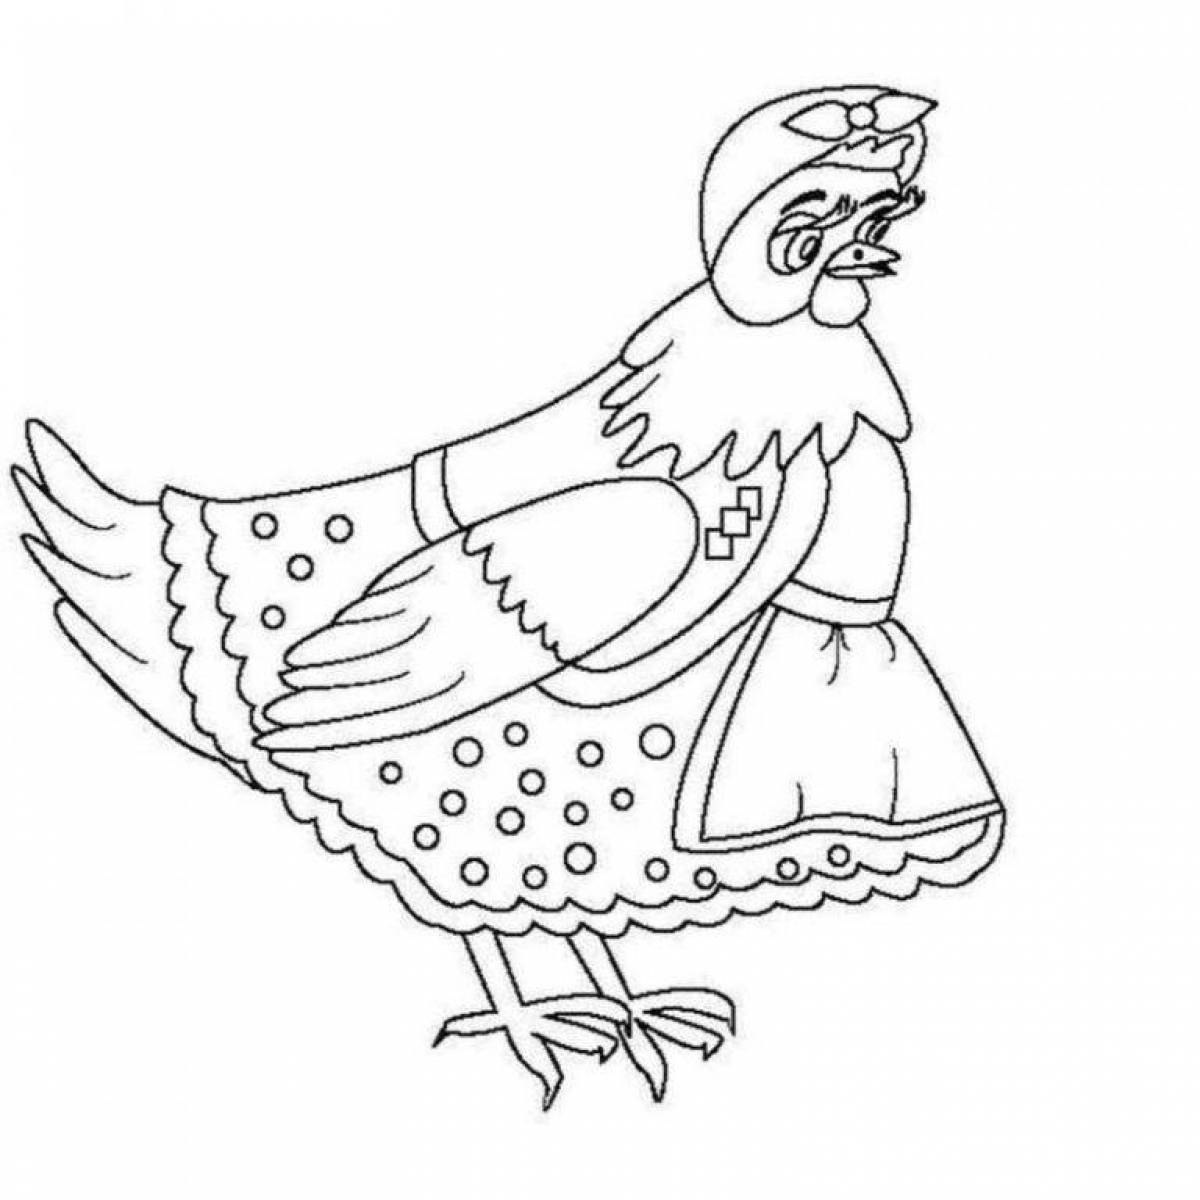 Witty chicken coloring book